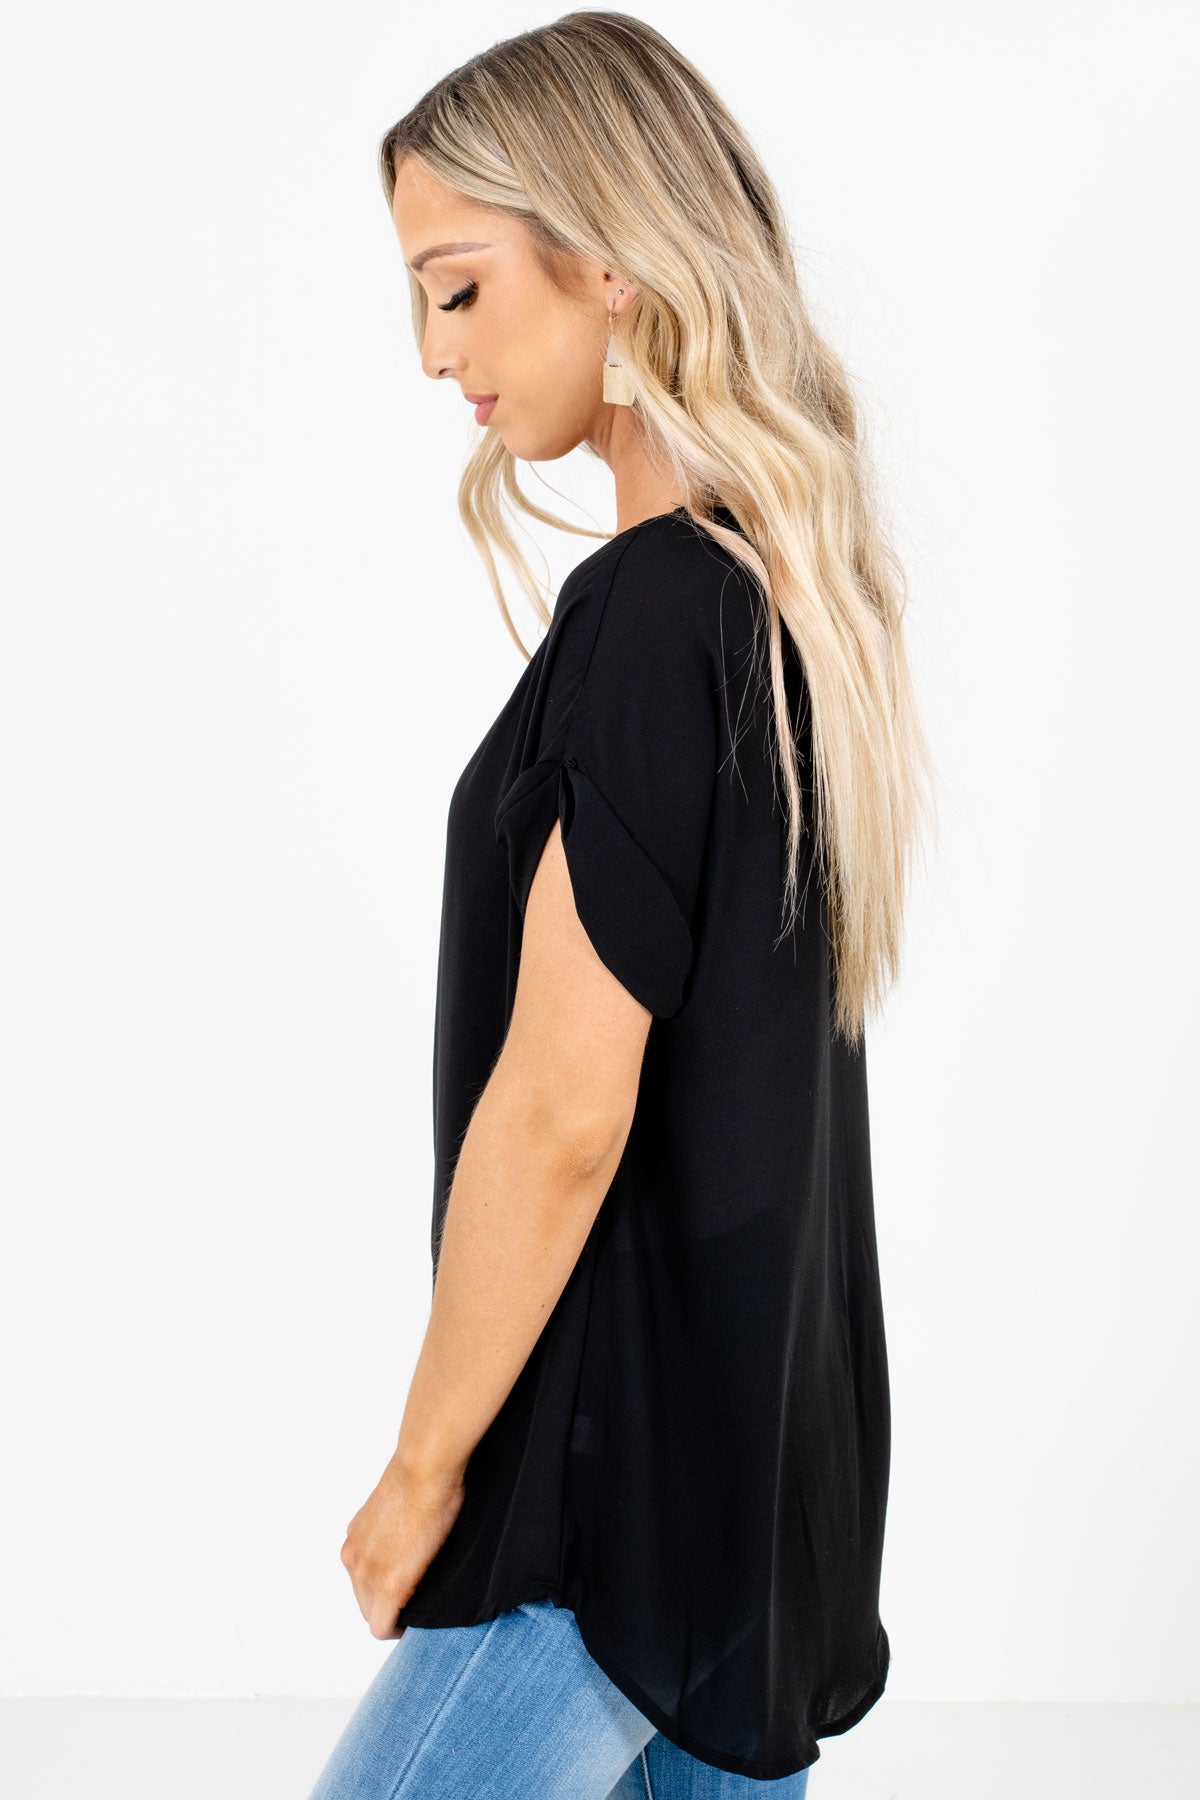 Boutique Blouse in Black for Women